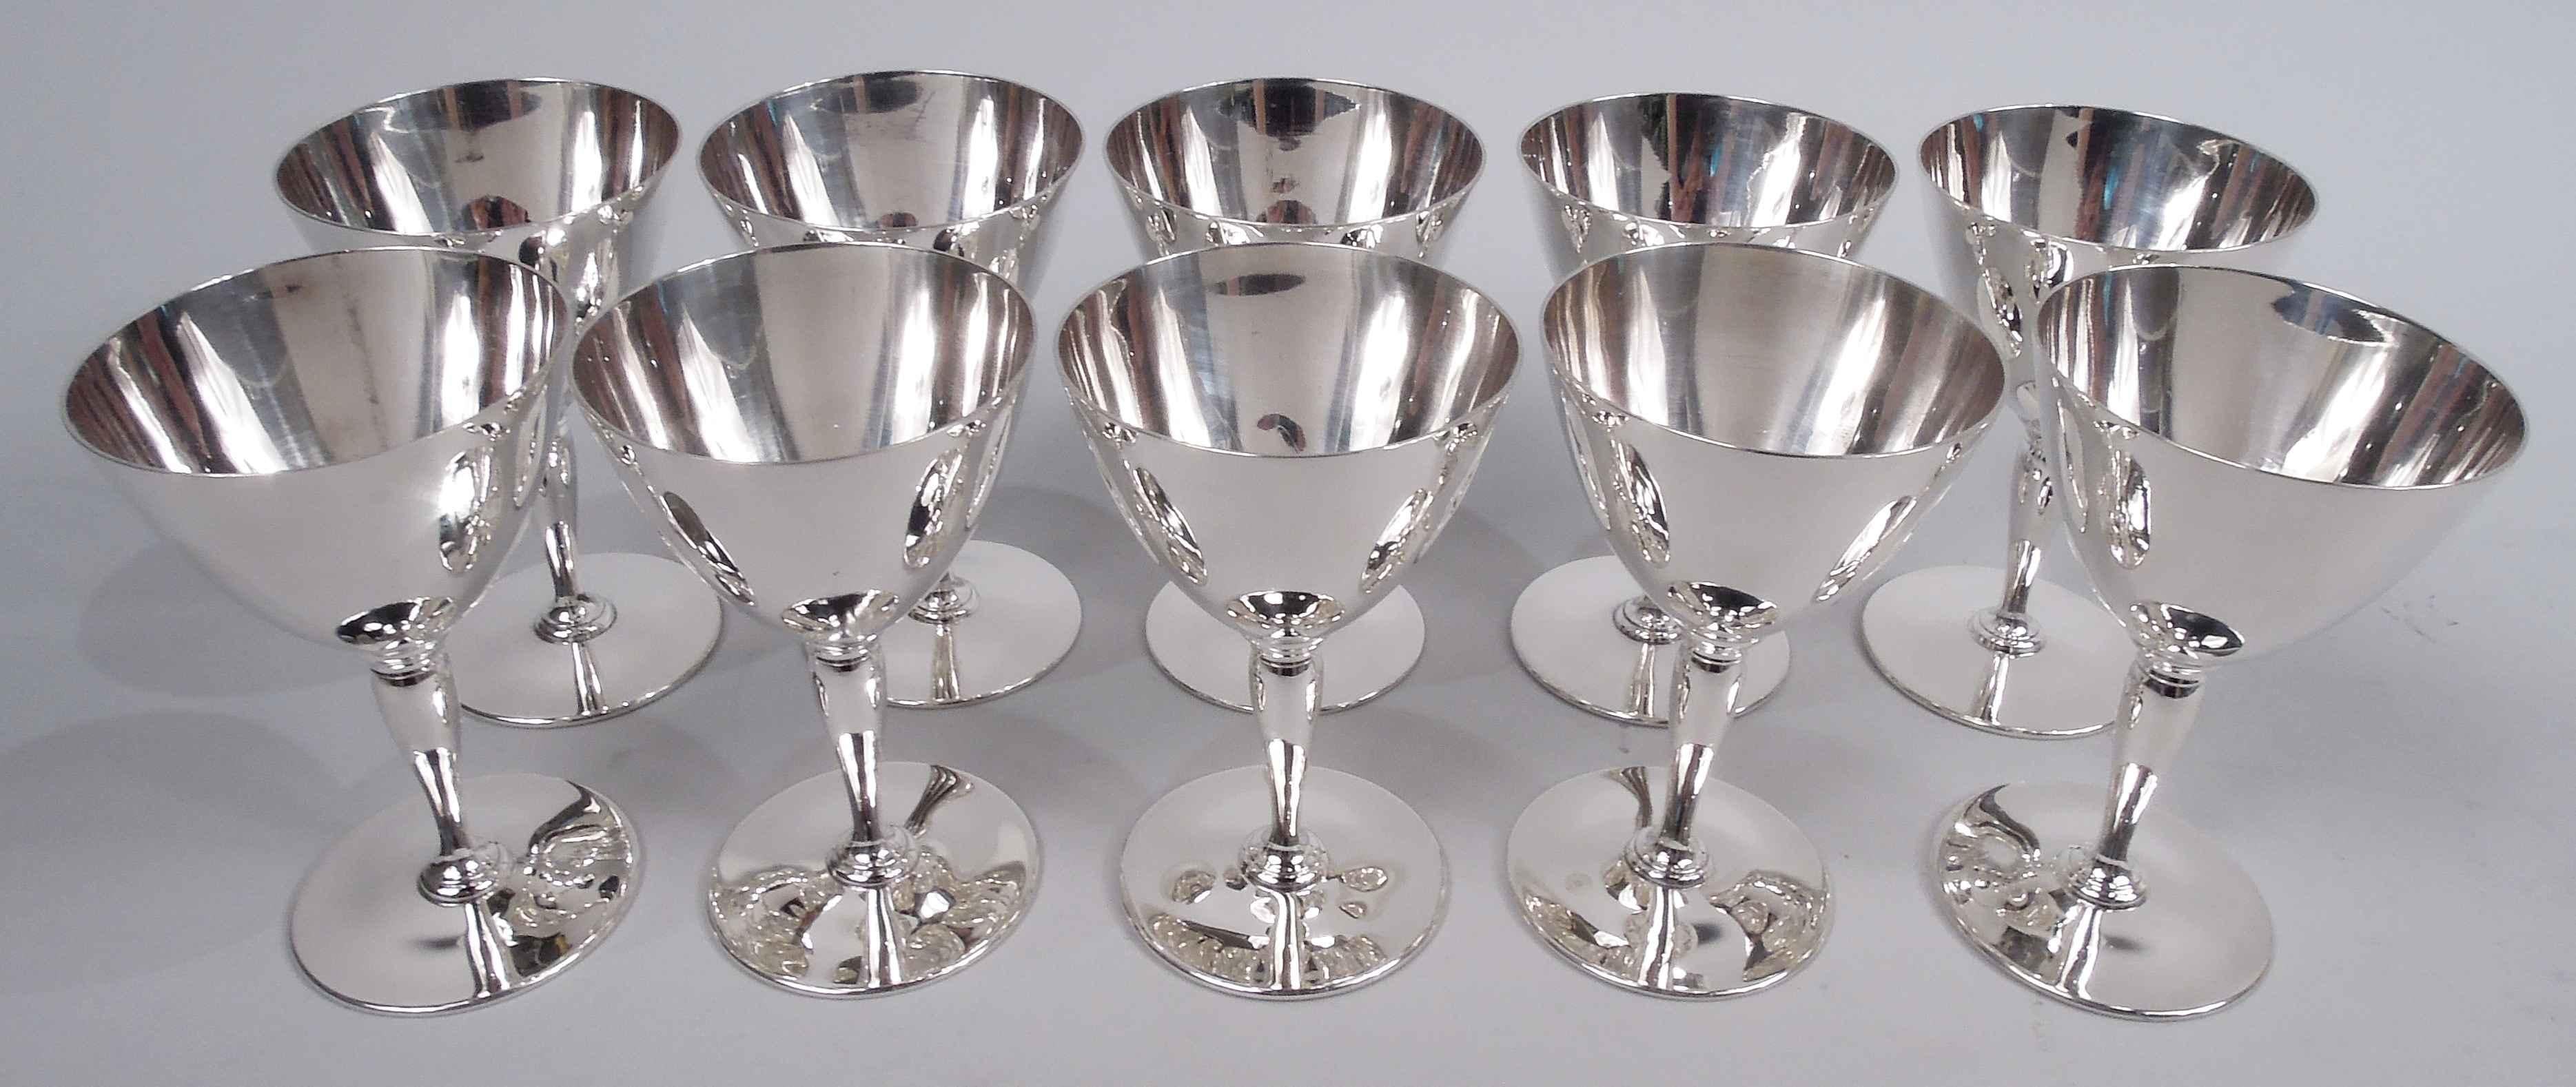 Set of 10 Art Deco sterling silver cocktail cups. Made by Tiffany & Co. in New York, ca 1915. Each: Cone on baluster mounted to round foot. Spare and functional. Nice balance for swishing the booze around. Fully marked including maker’s stamp,